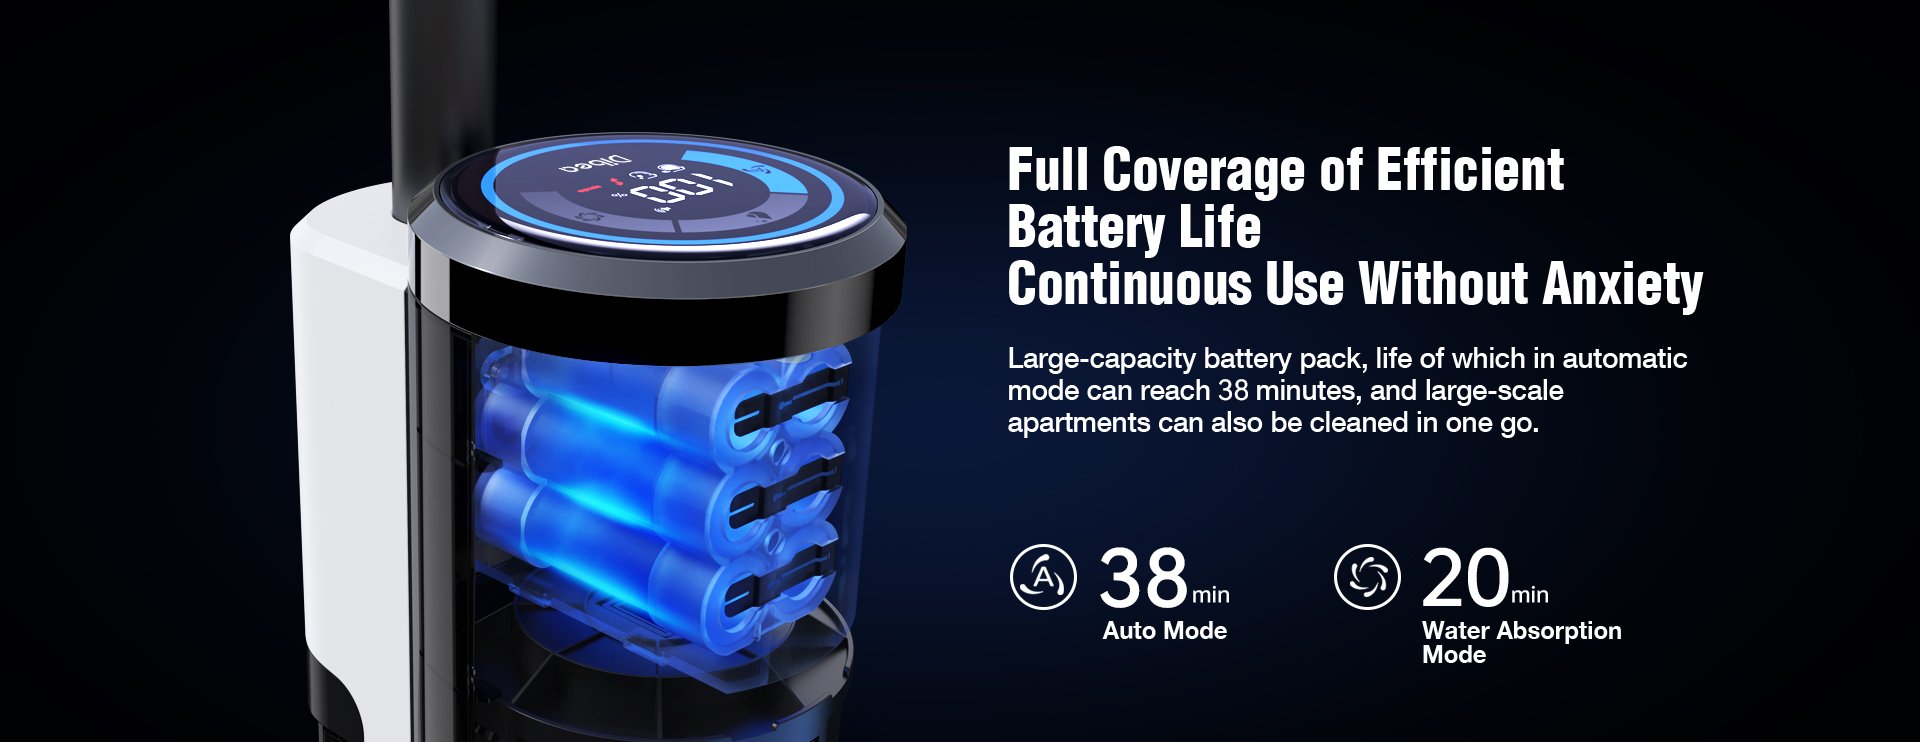 Full_Coverage_of_EfficientBattery_LifeContinuous_Use_Without_Anxiety